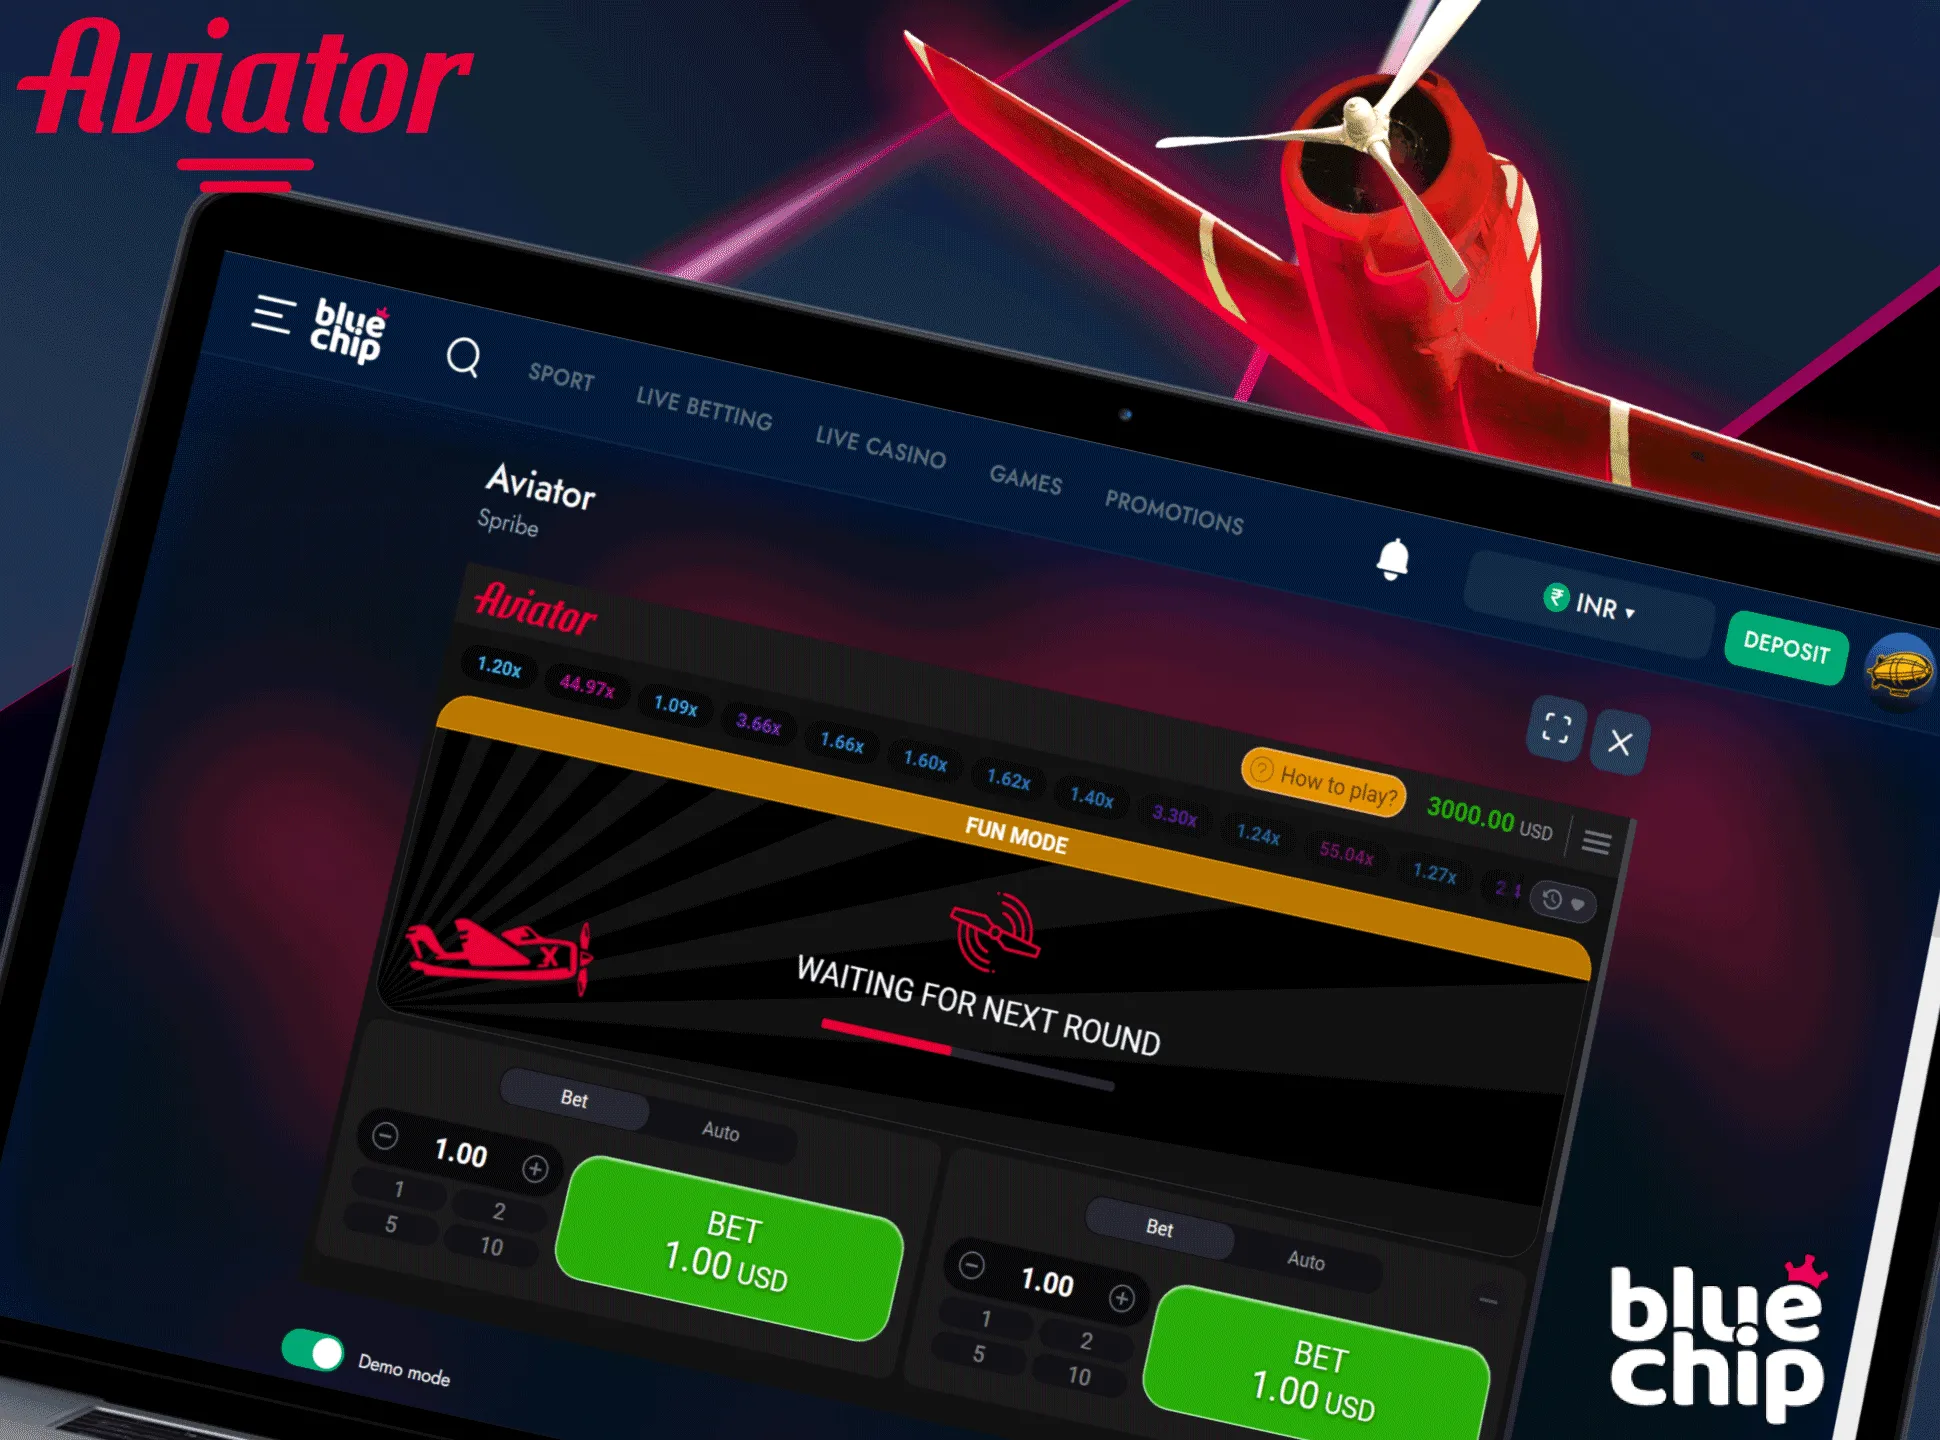 Bluechip casino provides the best Aviator gaming experience.